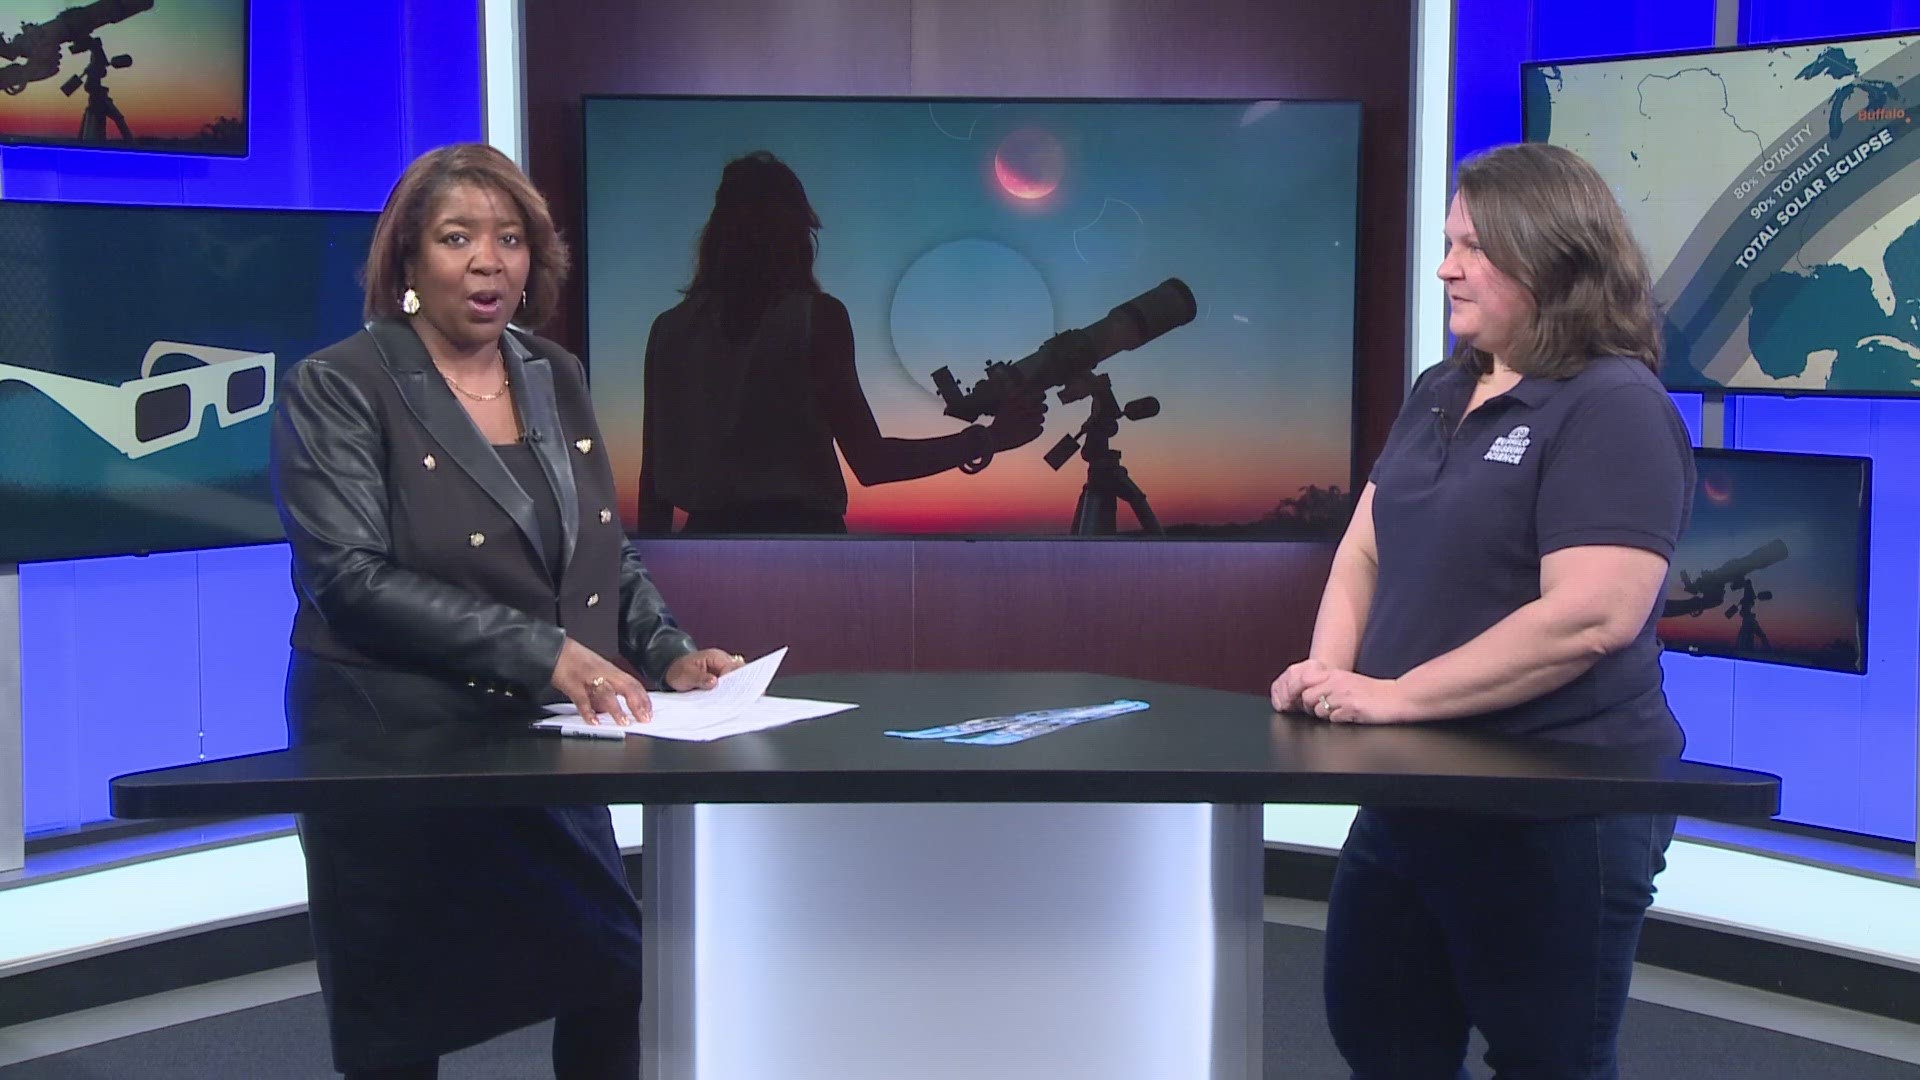 Dr. Holly Schreiber, chief scientist for the Buffalo Society of Natural Sciences, discussed next month's total solar eclipse with Claudine Ewing.